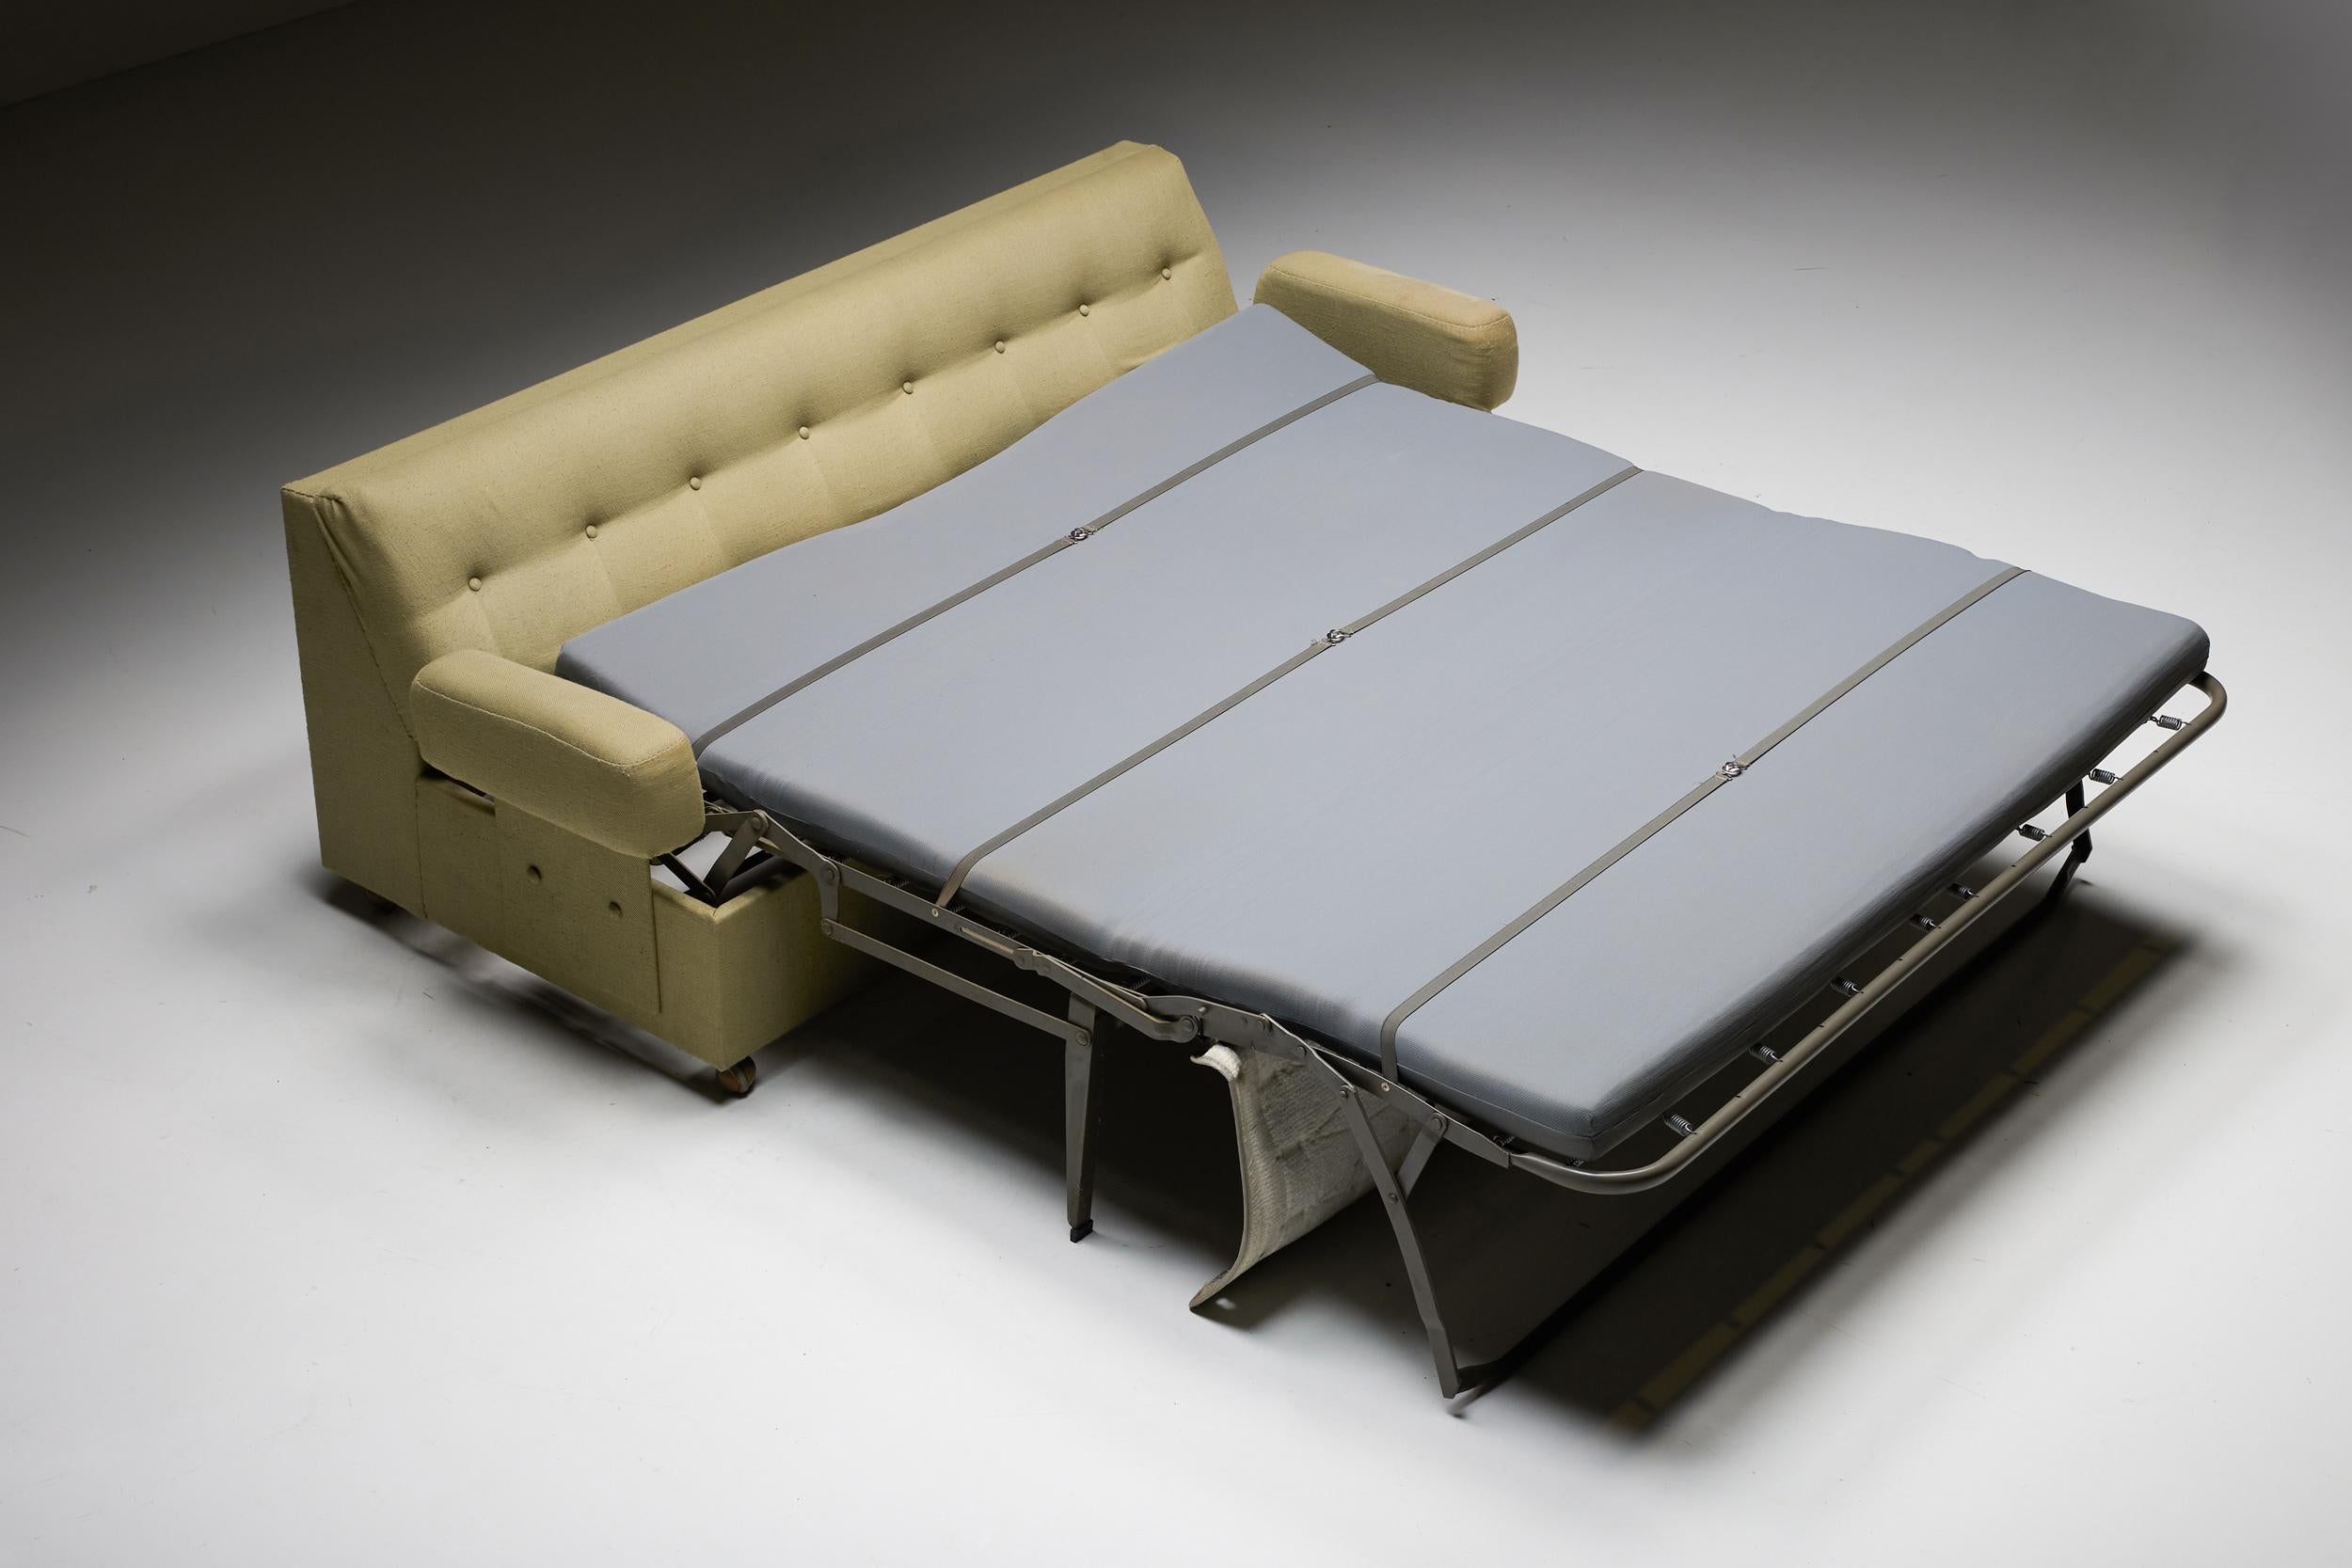 Sofa Daybed in Green Upholstery, Seng Company, Germany, 1930s For Sale 1